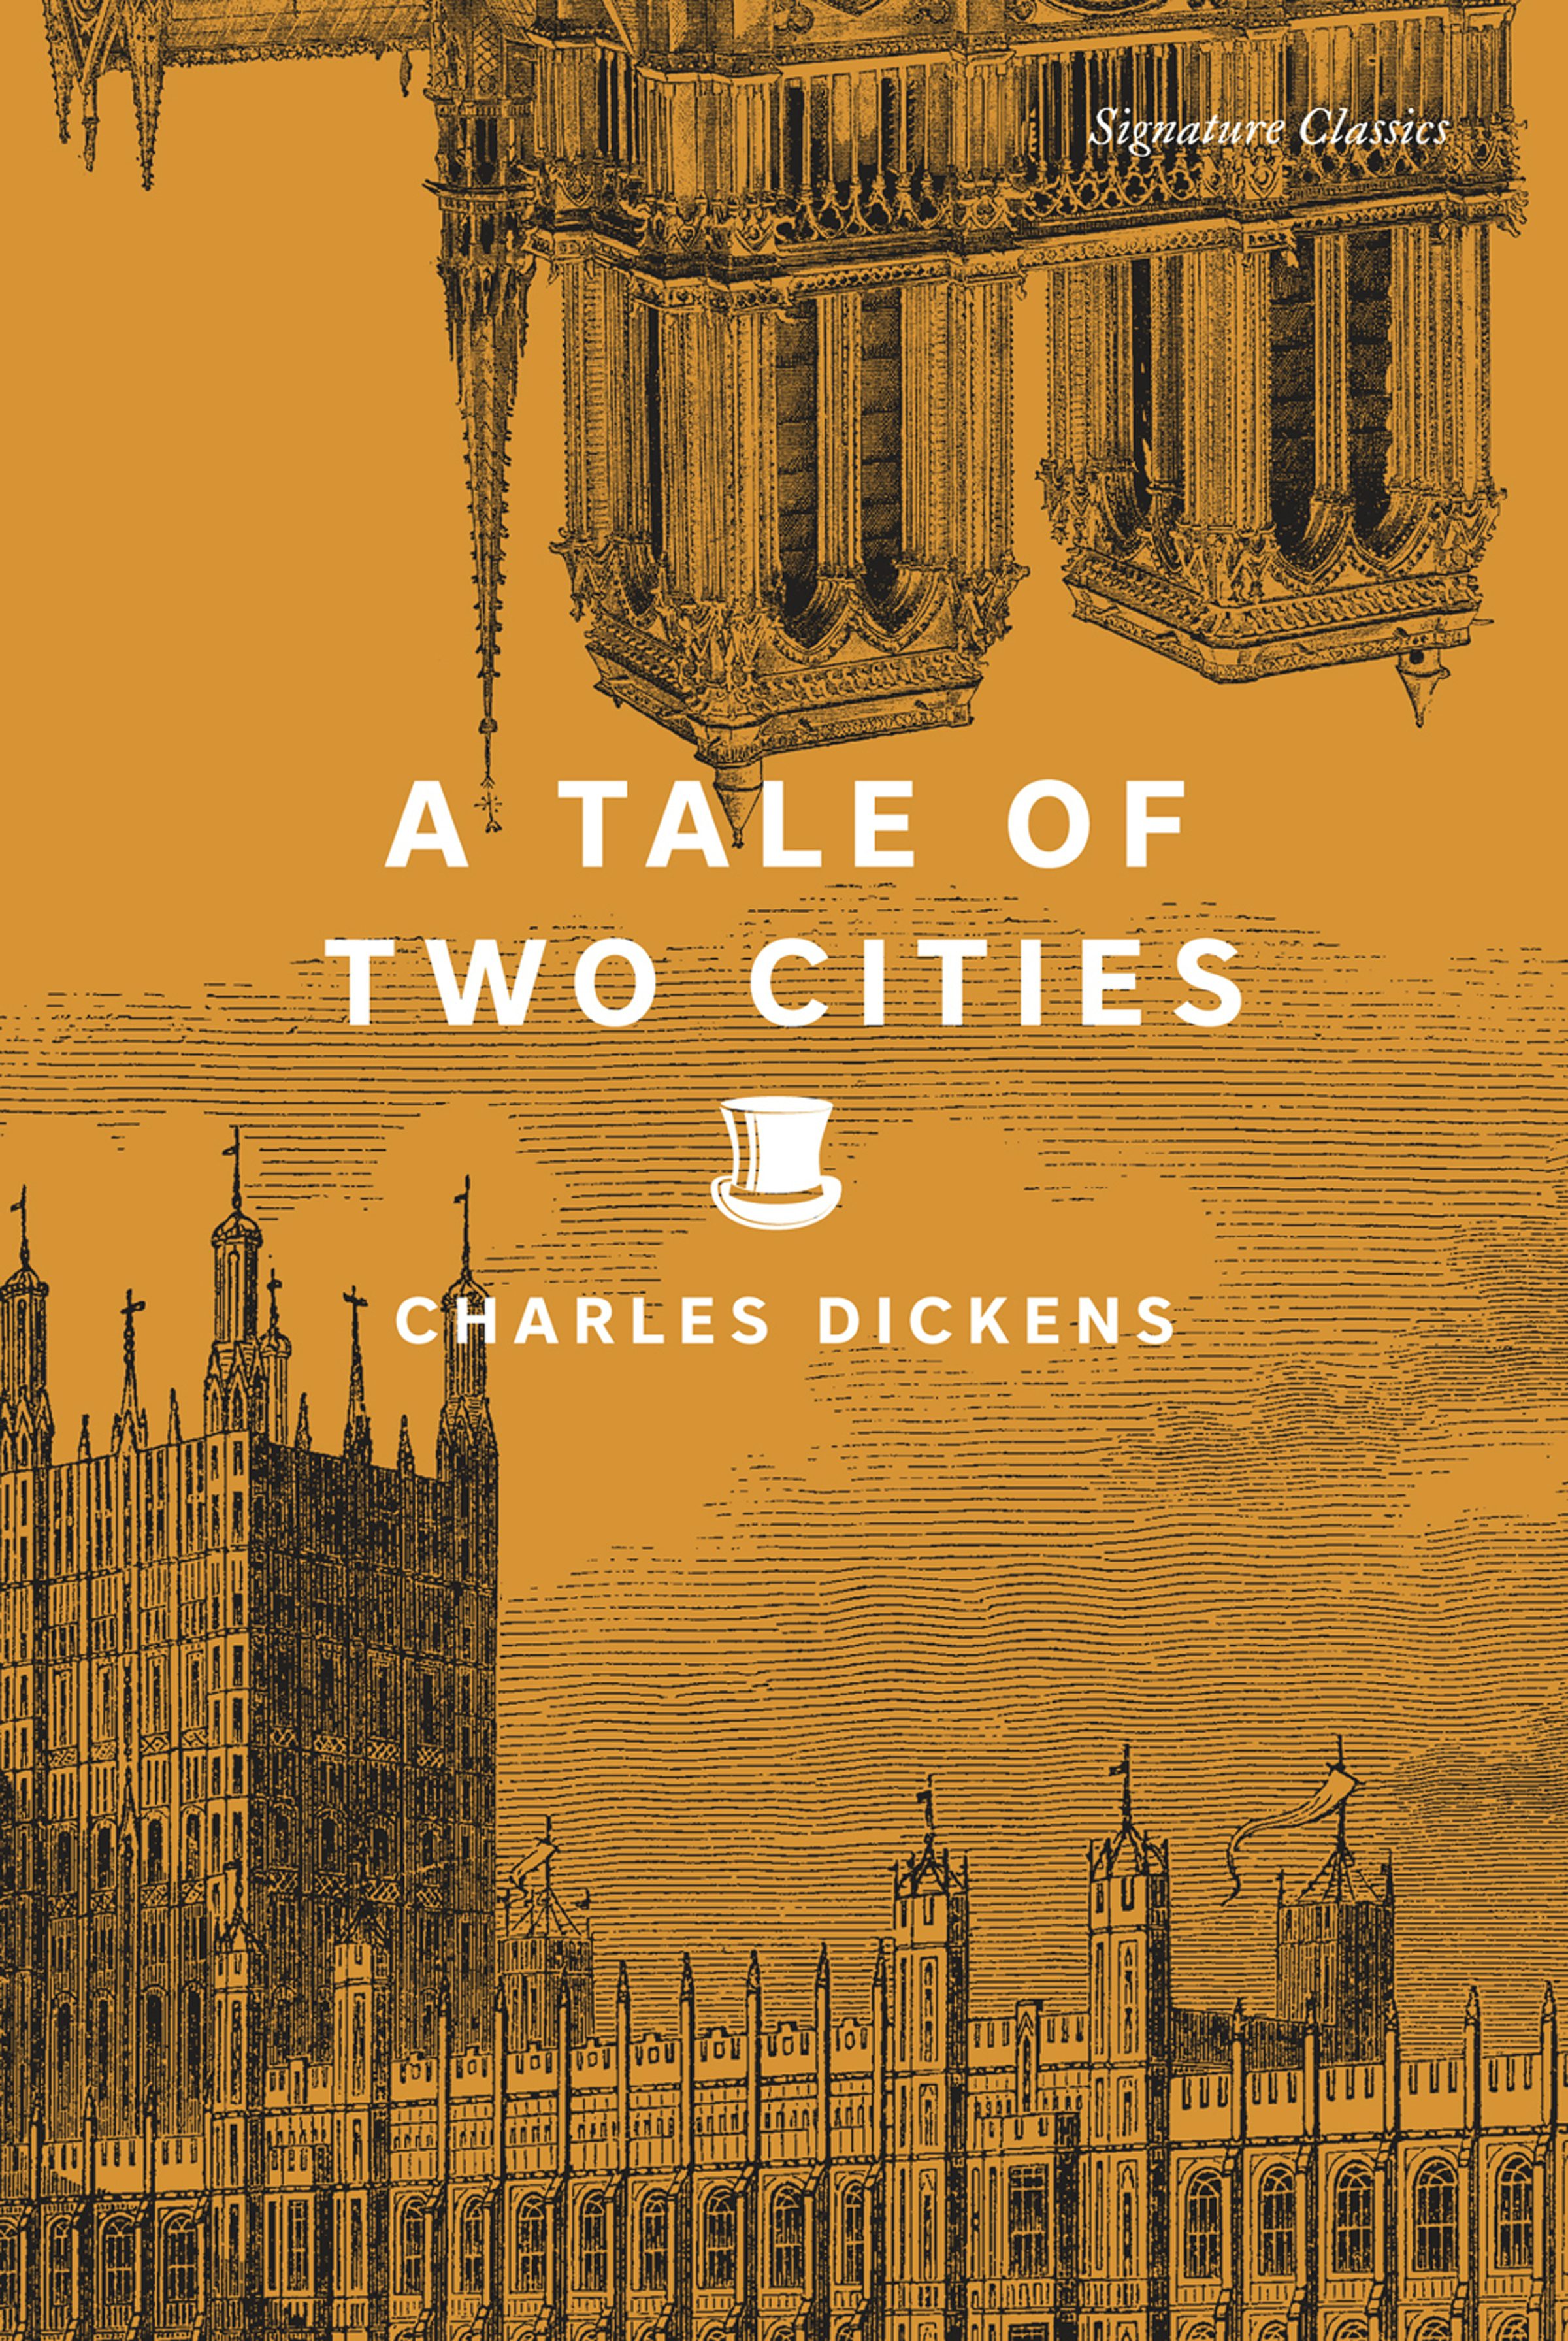 A Tale of Two Cities by Charles Dickens: 9781435171480 - Union 